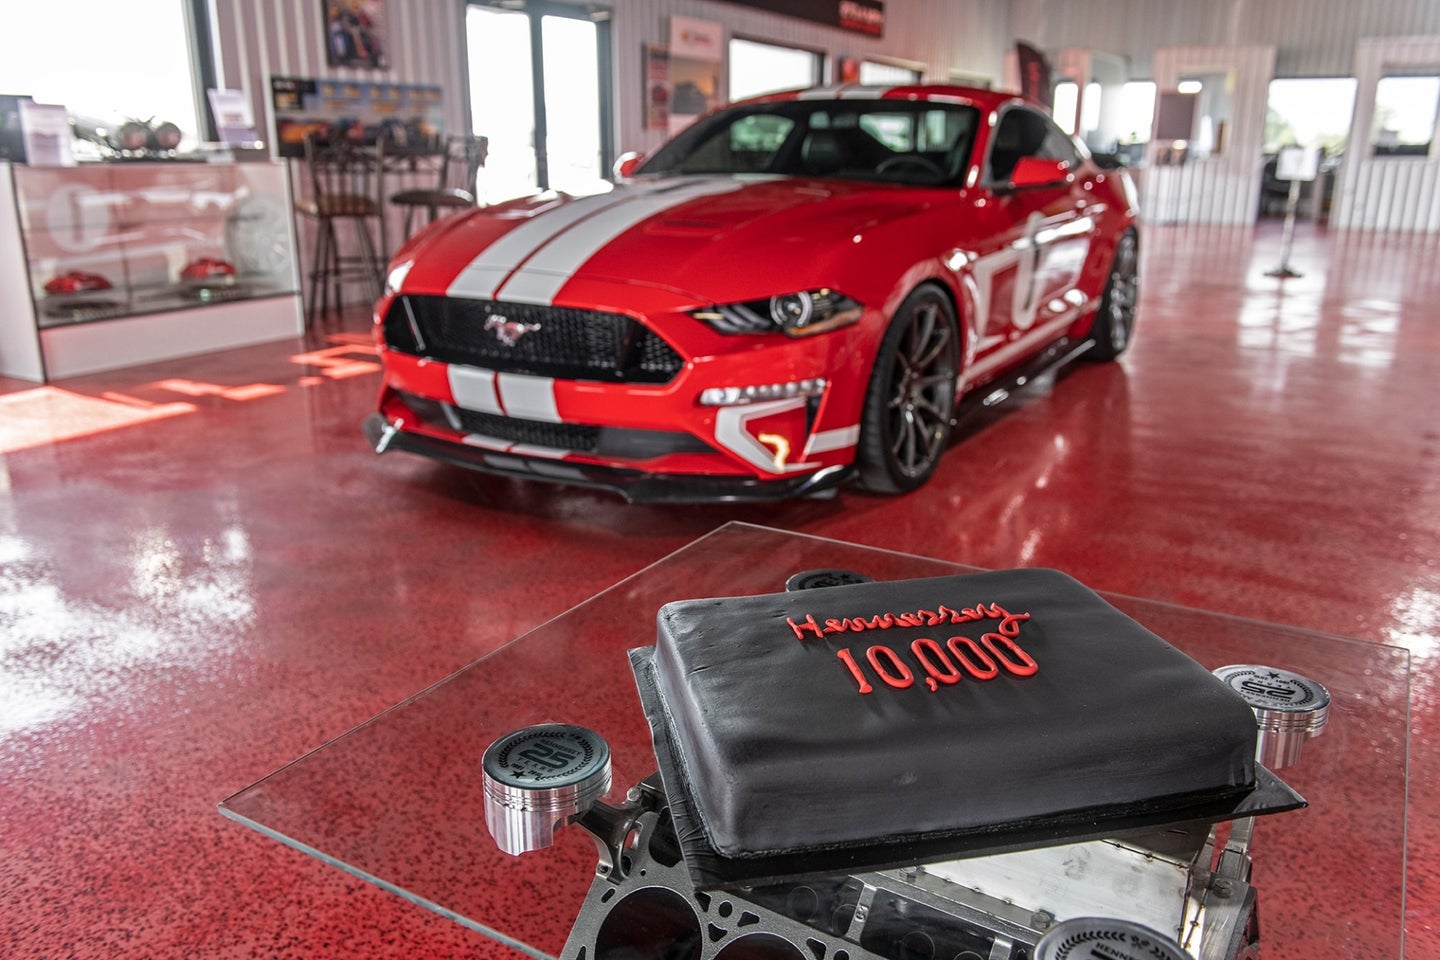 Hennessey’s 10,000th Vehicle Is a Monster 808-HP Heritage Edition Mustang